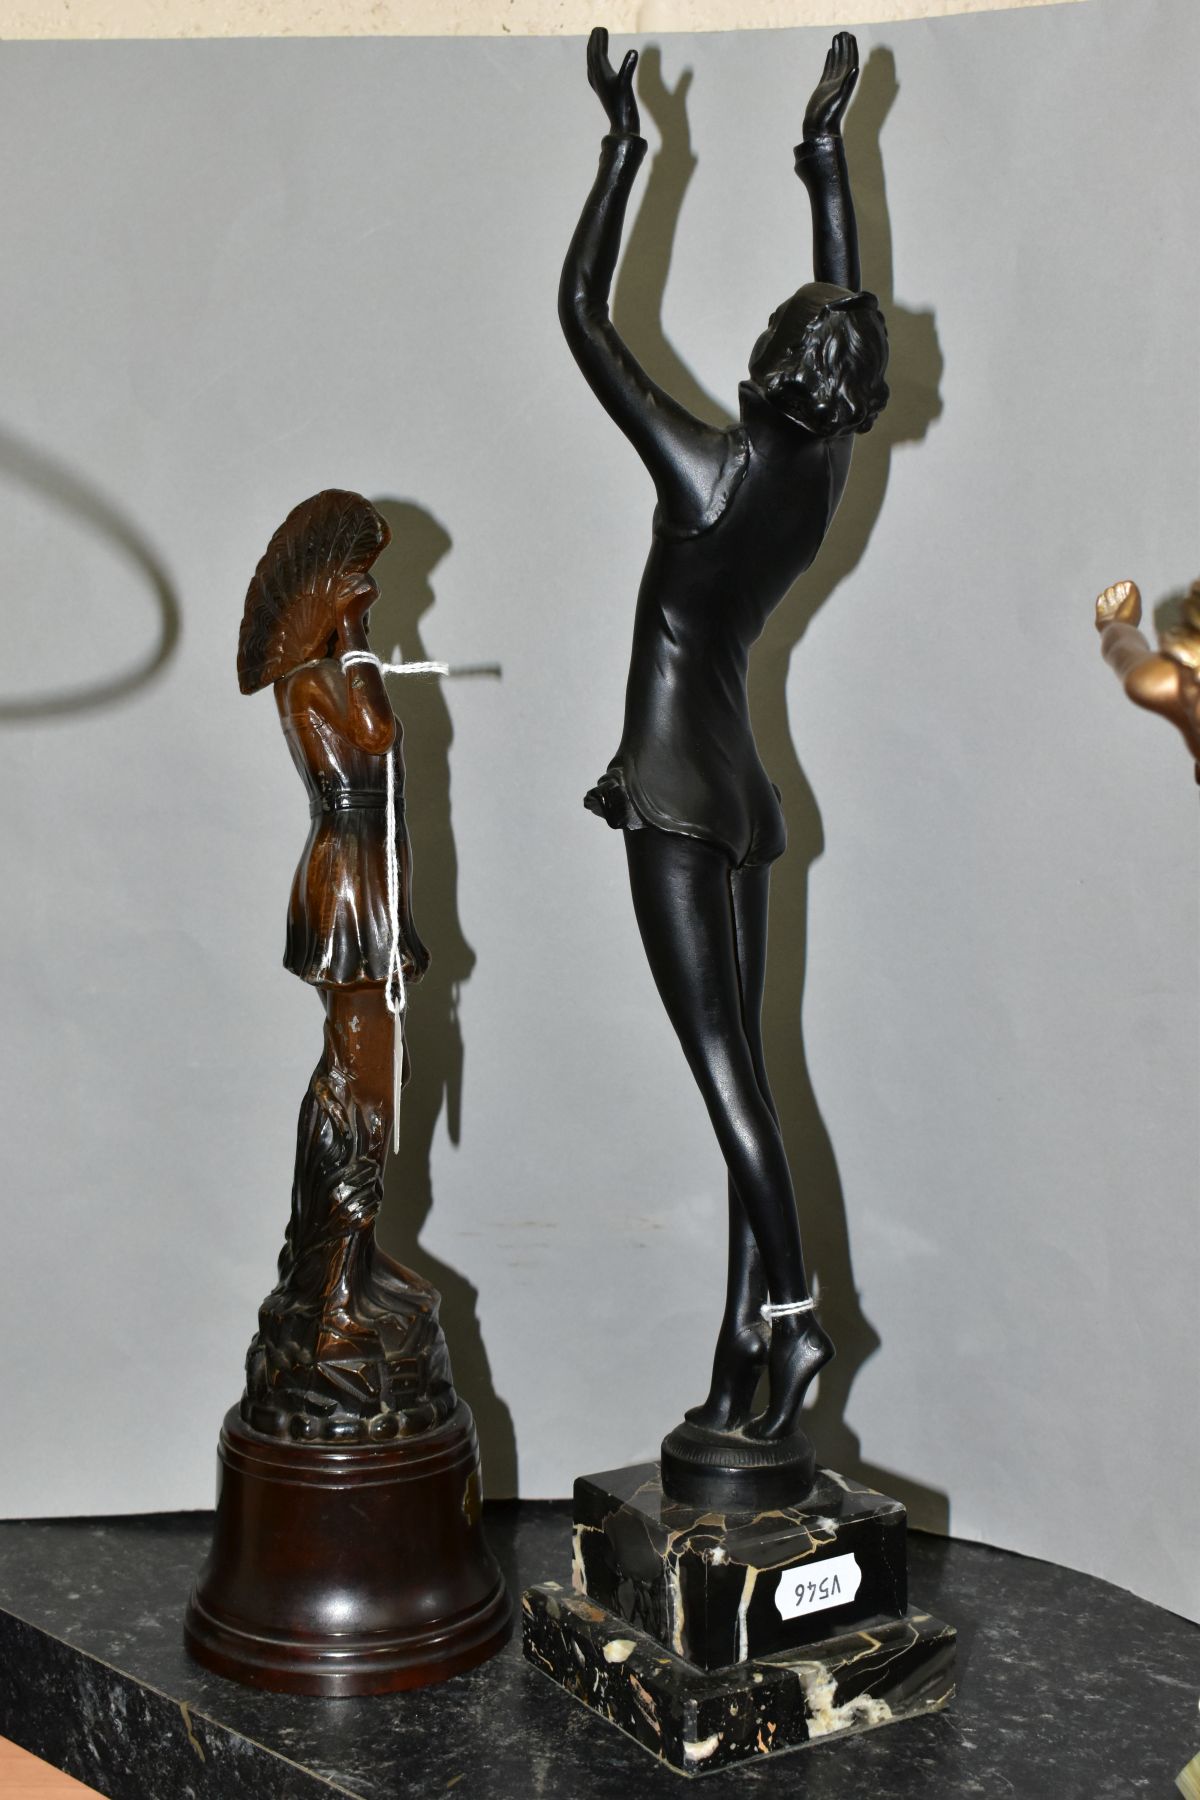 ART DECO STYLE FIGURINES, comprising a bronzed metal scantilly clad female on an onyx plinth, - Image 10 of 11